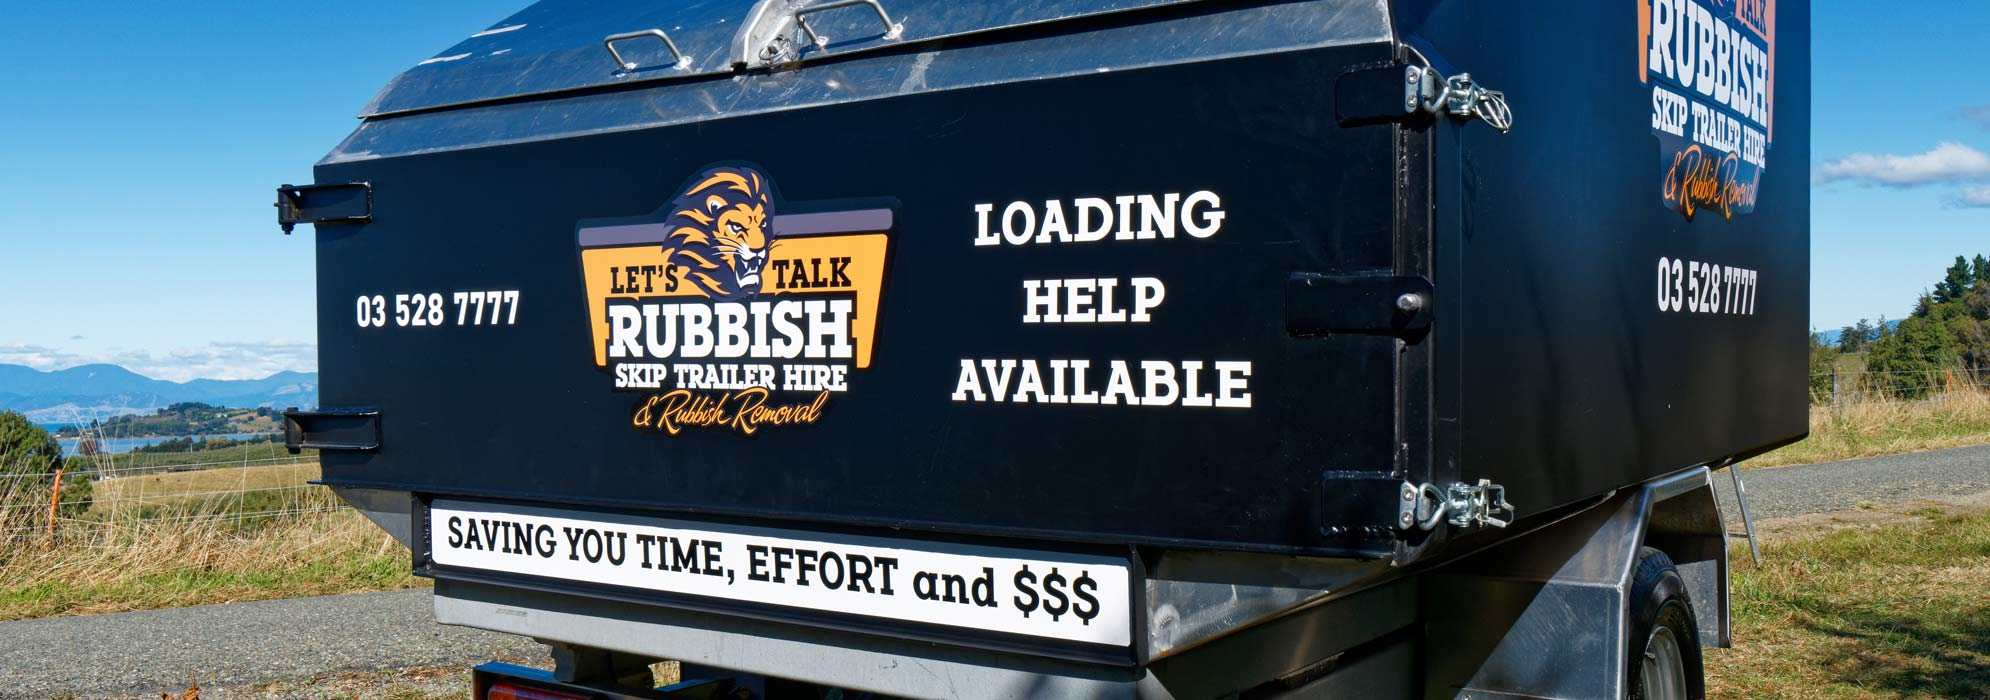 Contact Let's Talk Rubbish for your rubbish and waste disposal